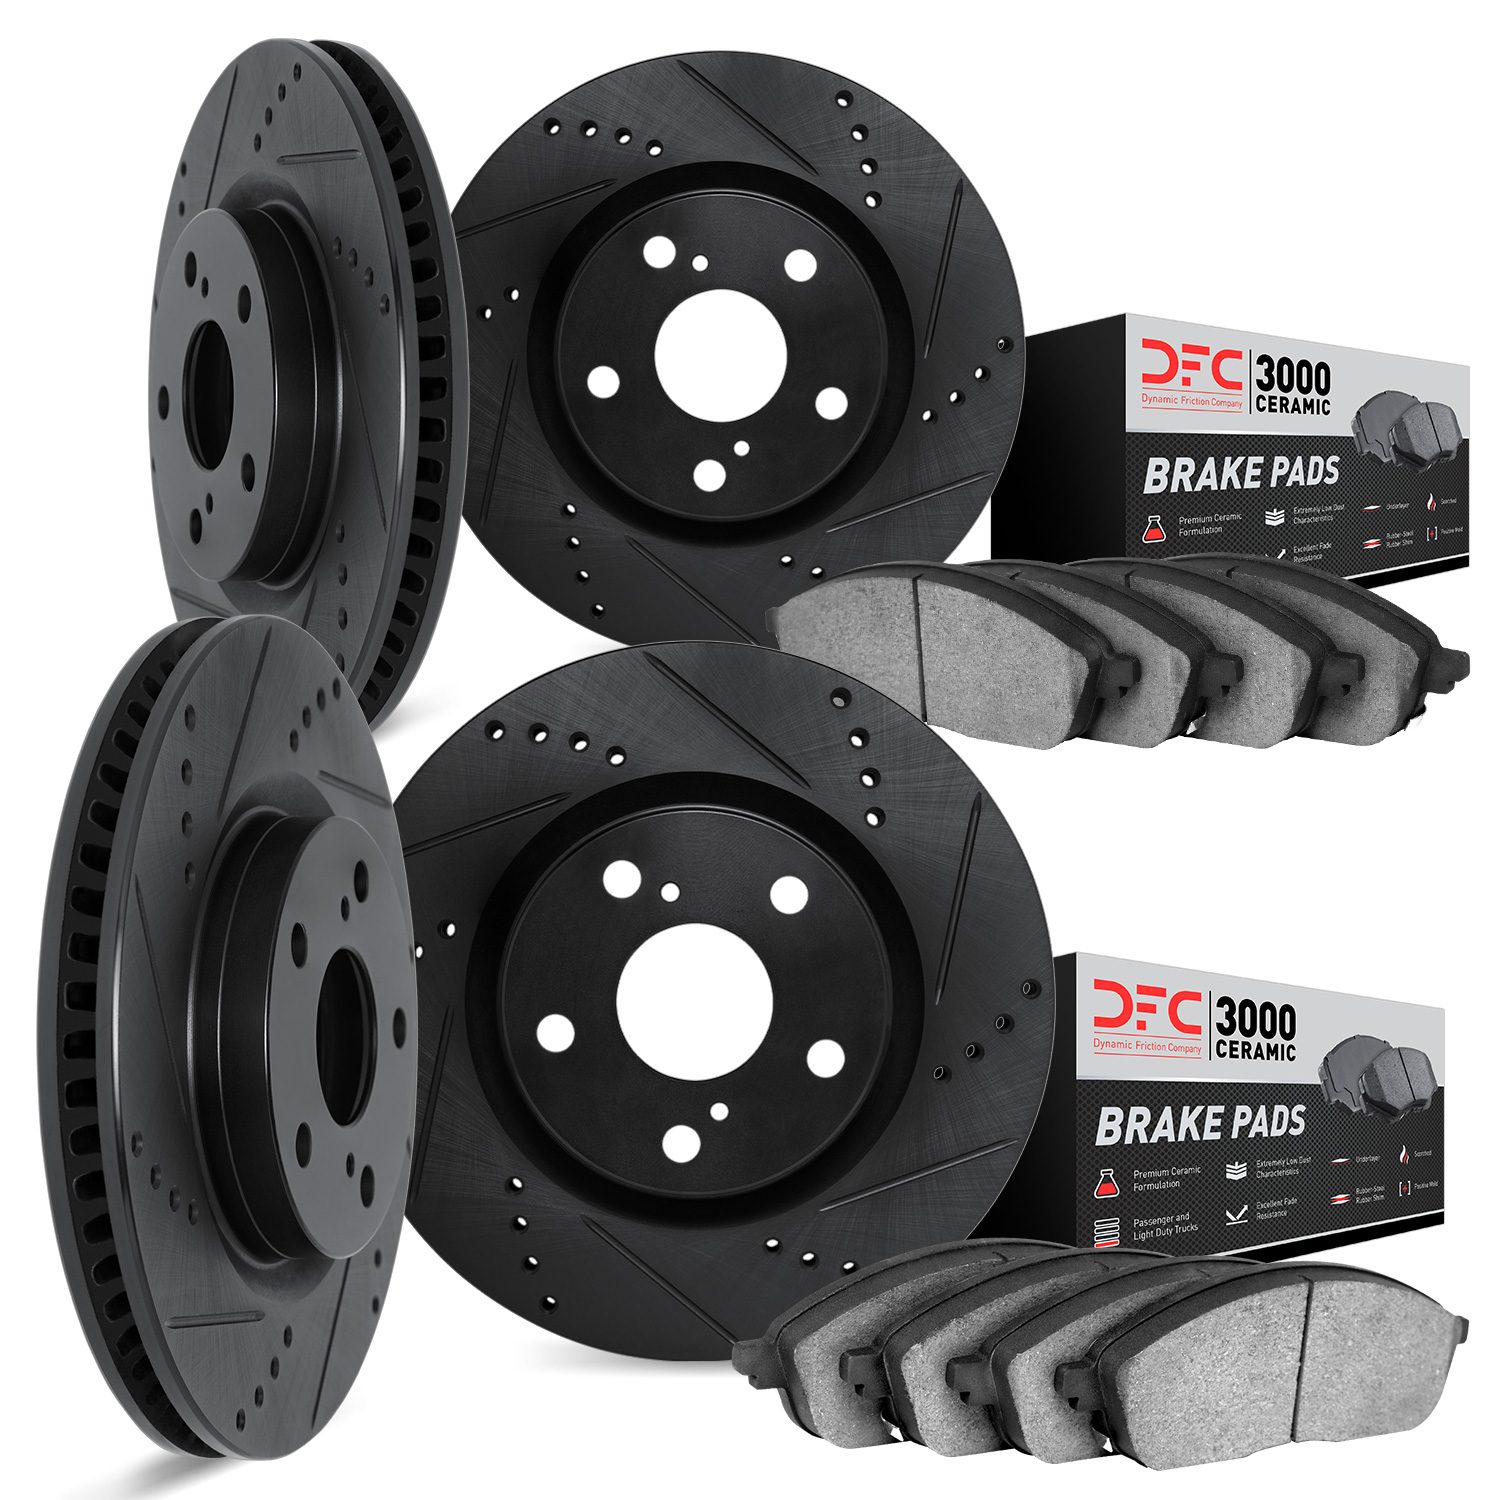 8304-31092 Drilled/Slotted Brake Rotors with 3000-Series Ceramic Brake Pads Kit [Black], Fits Select BMW, Position: Front and Re